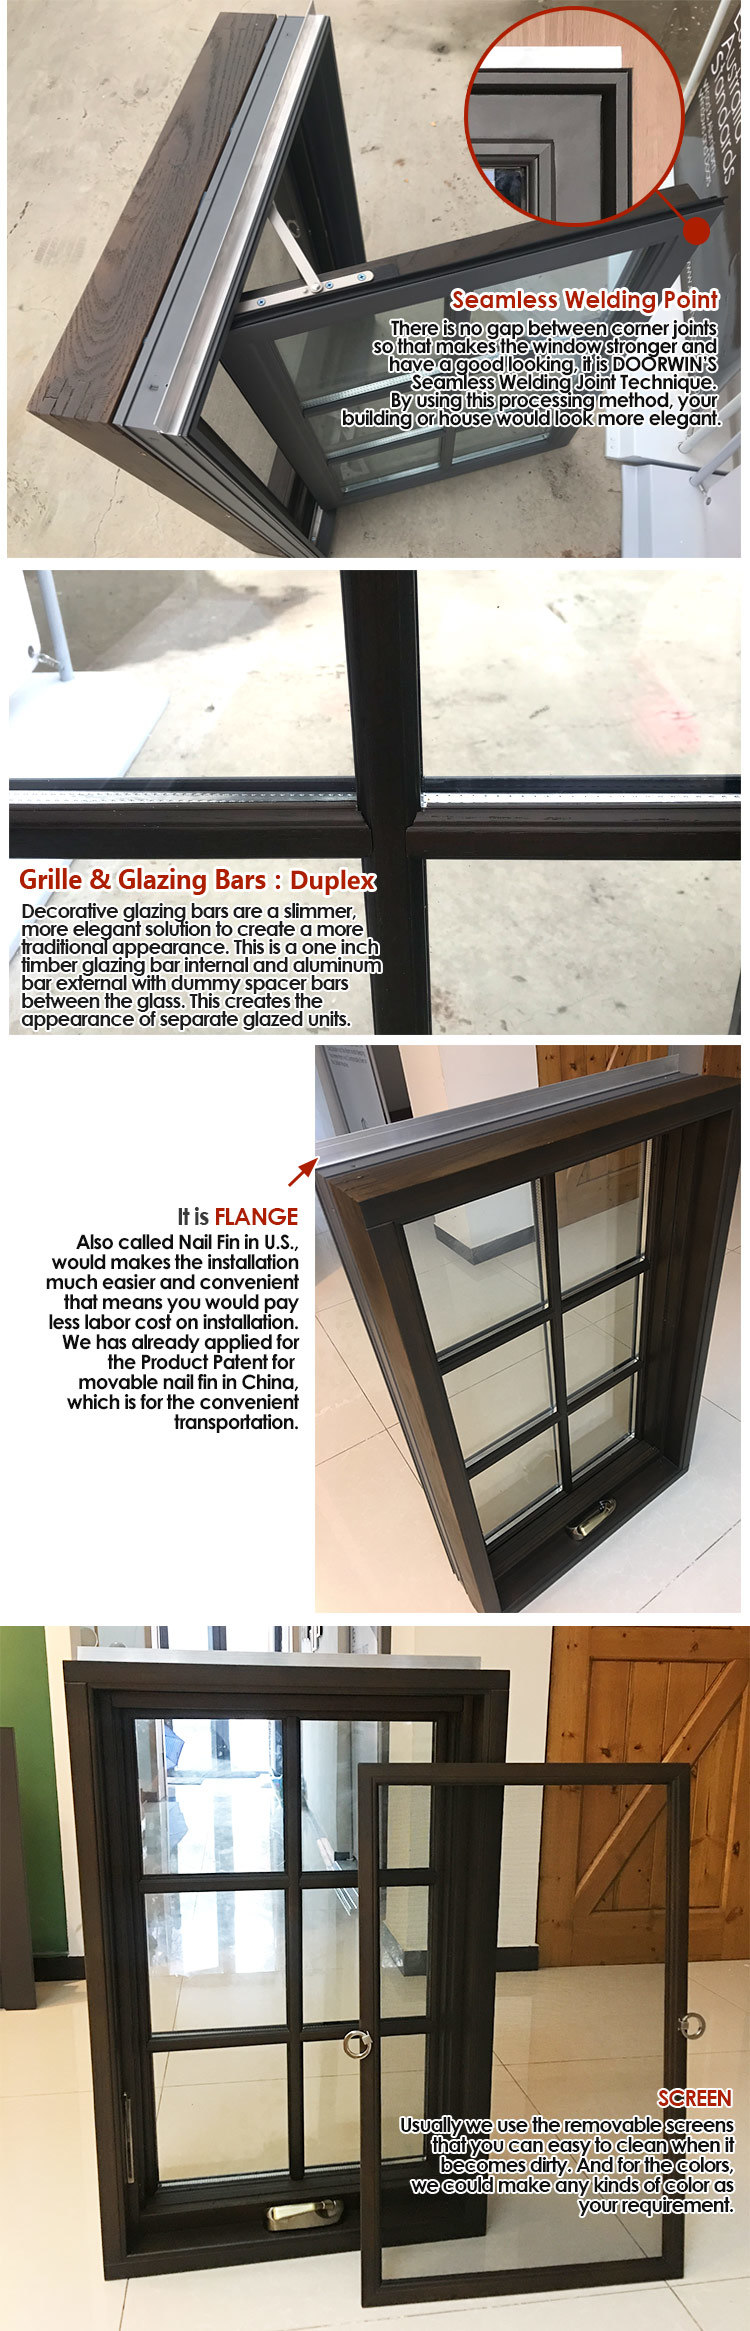 European Standard Style Aluminum Inswing and Fixed Window, Casement Window with Stainless Steel Screen or Latest Grille Design, Fixed Aluminum Window